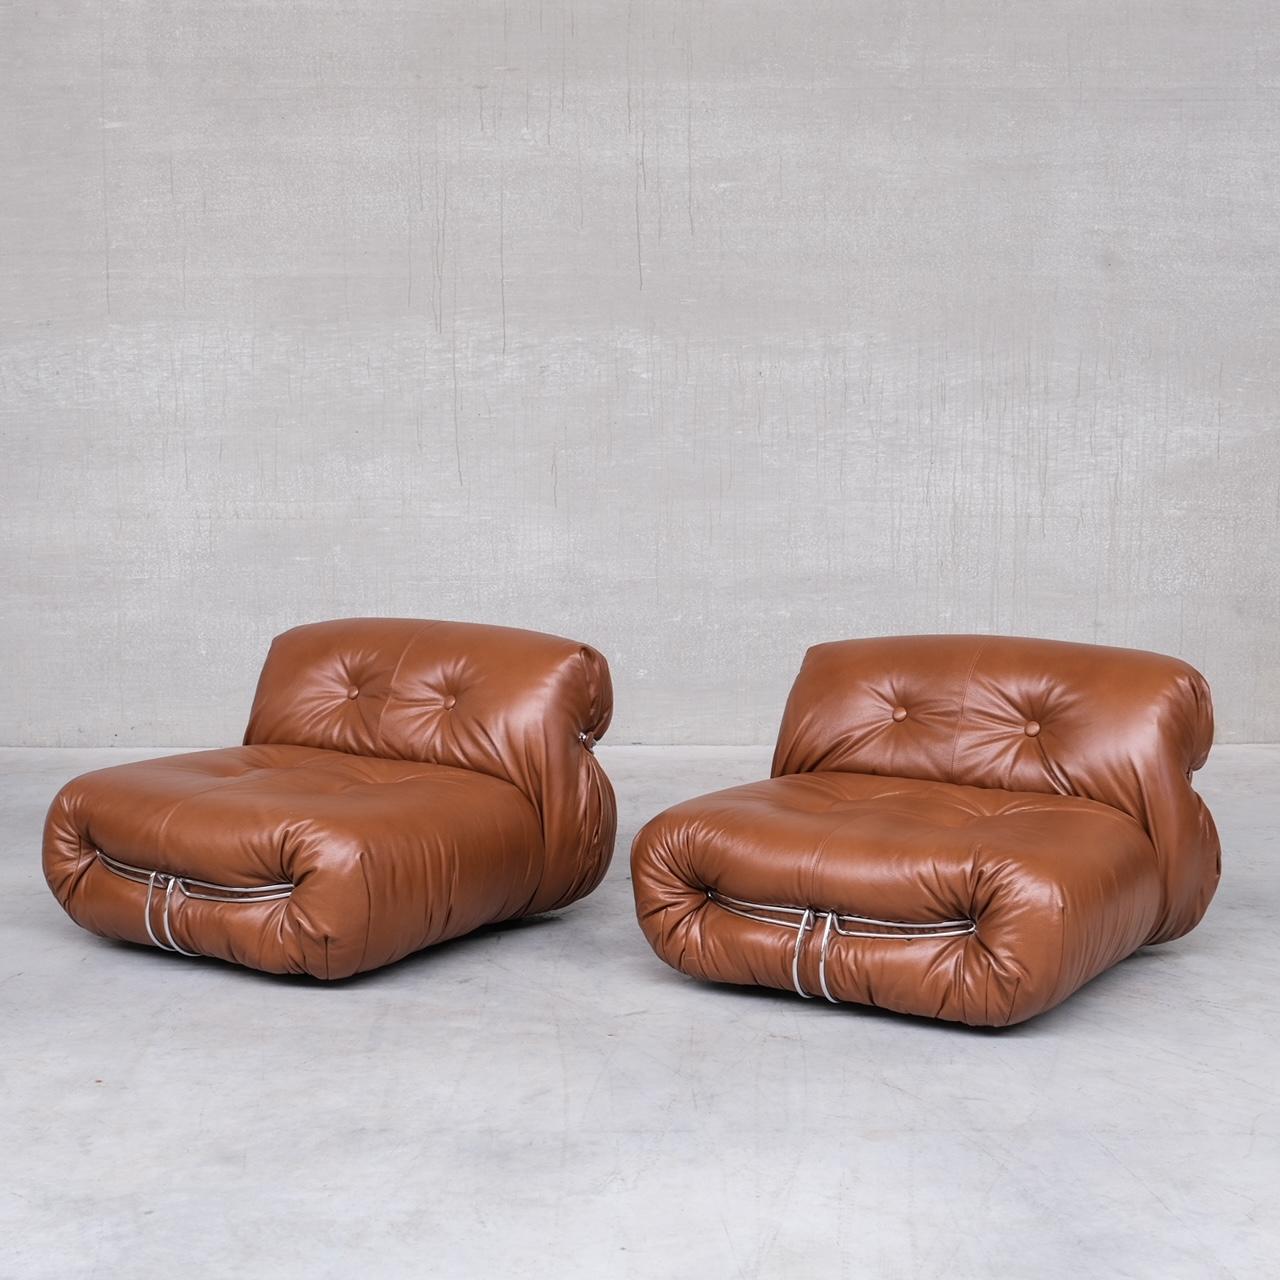 Pair of Leather Soriana Lounge Chairs by Scarpa for Cassina 7